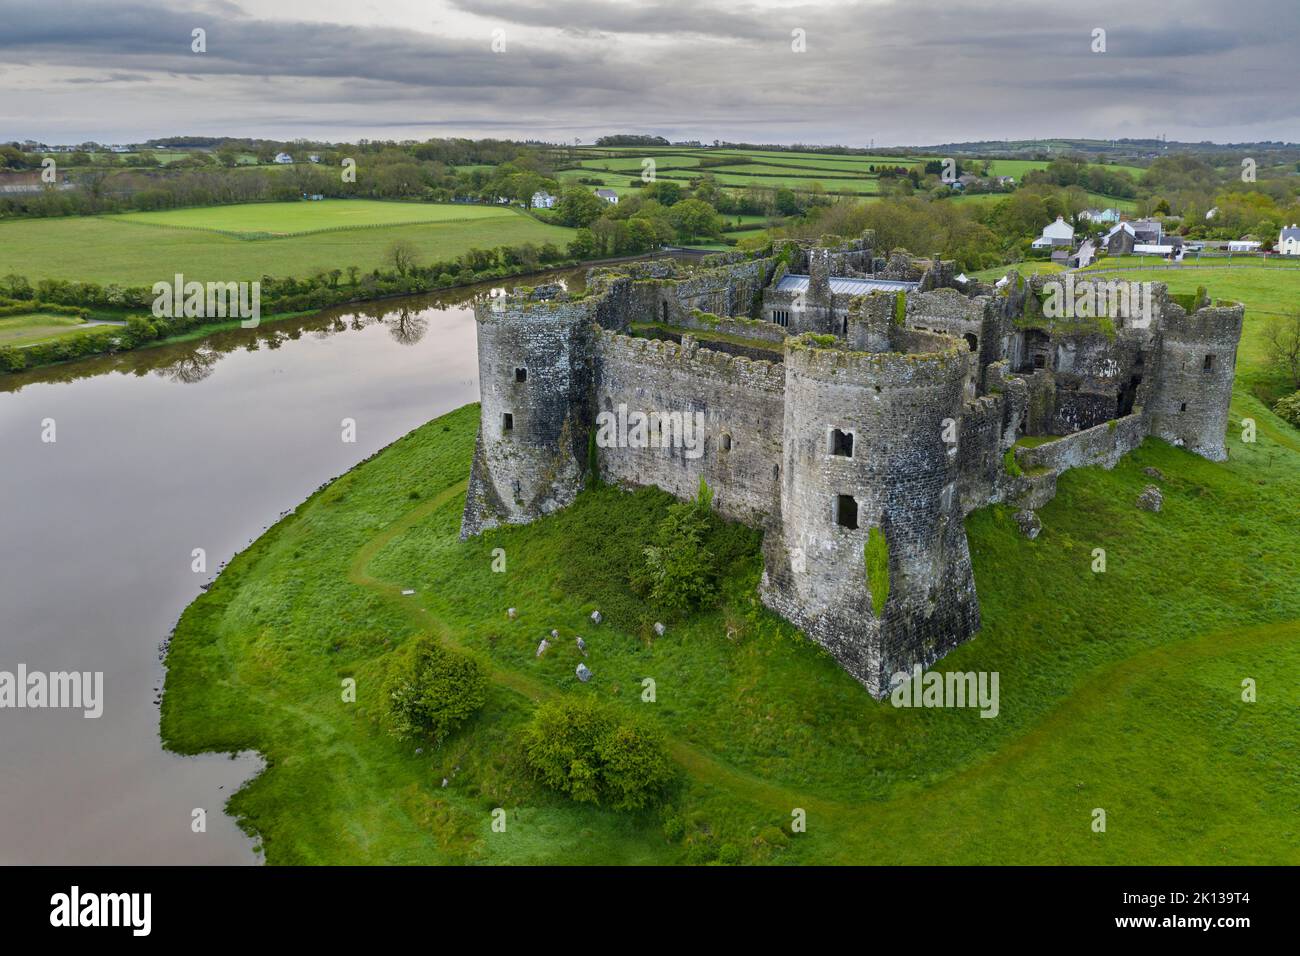 The magnificent ruins of Carew Castle, Carew, Pembrokeshire, Wales, United Kingdom, Europe Stock Photo